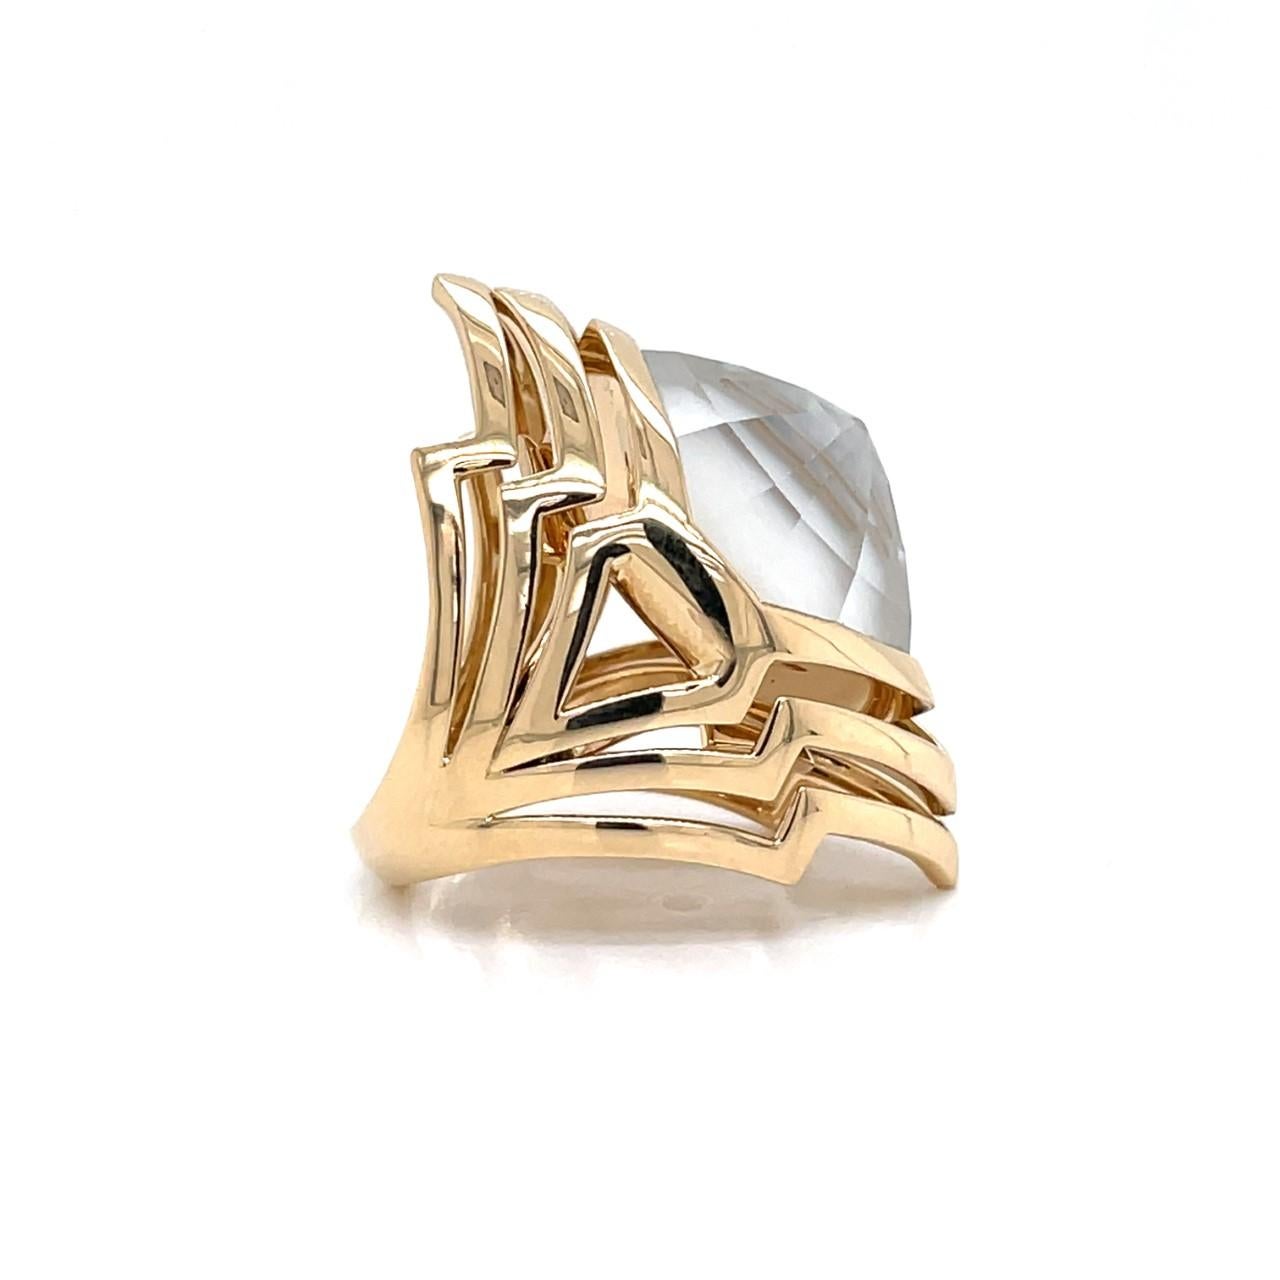 Brilliant Cut Stephen Webster Stardust Ring 18k Yellow Gold Clear Crystal Over Mother of Pearl